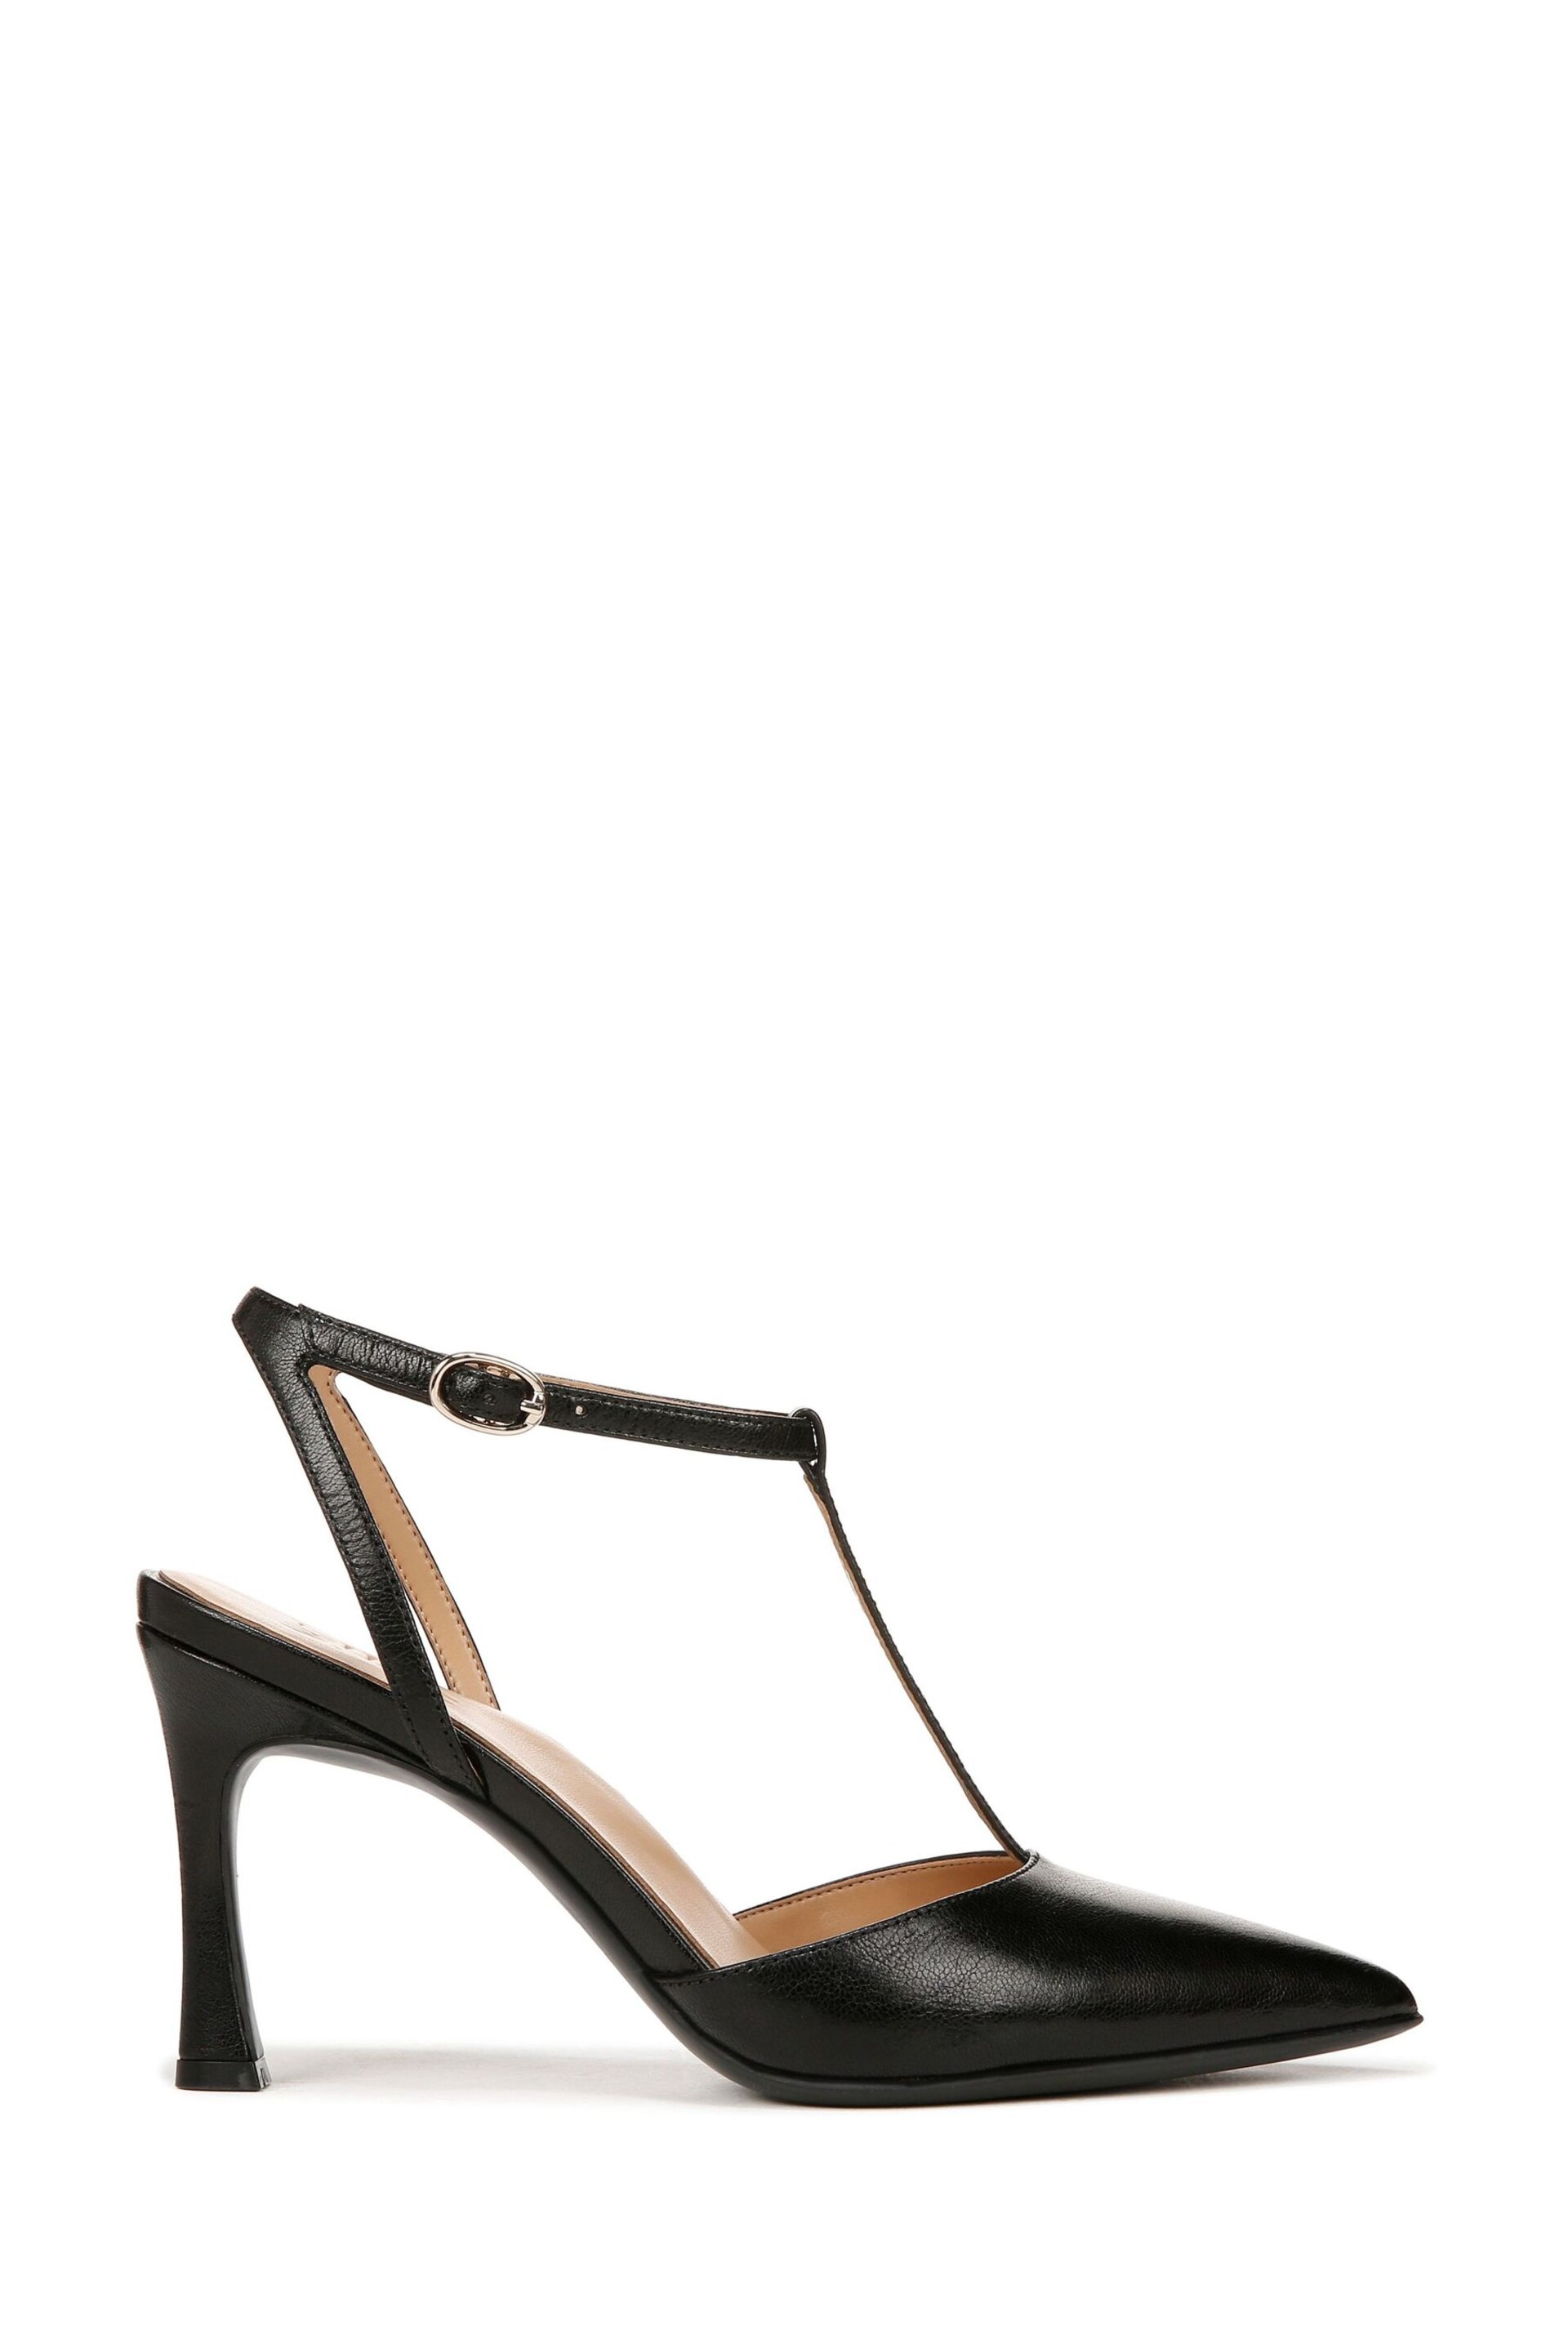 Naturalizer Astrid T-Bar Heeled Shoes - Image 1 of 7